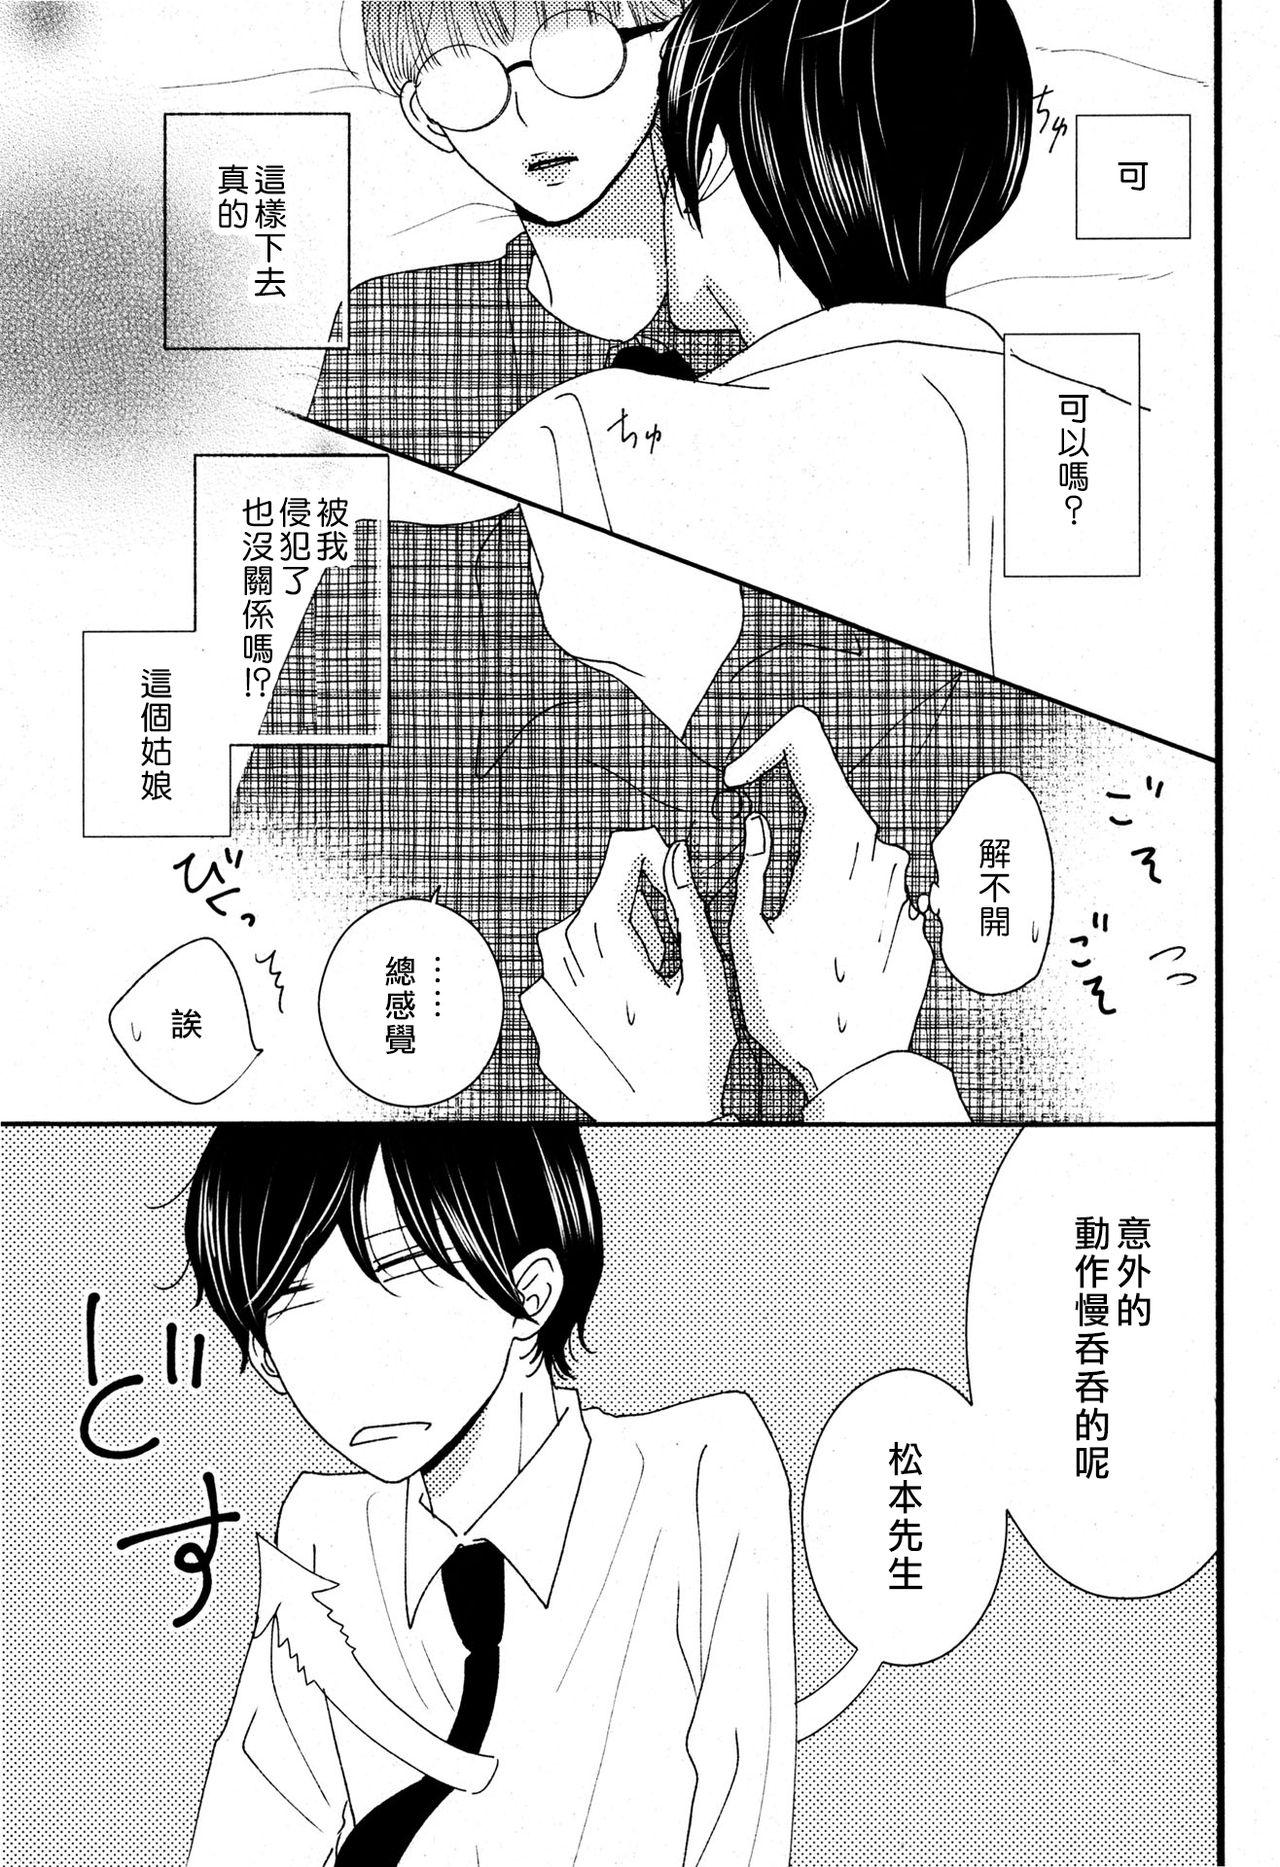 Gaping I'm a virgin, so what? | 是童贞有什么问题吗？ Fucking Hard - Page 13